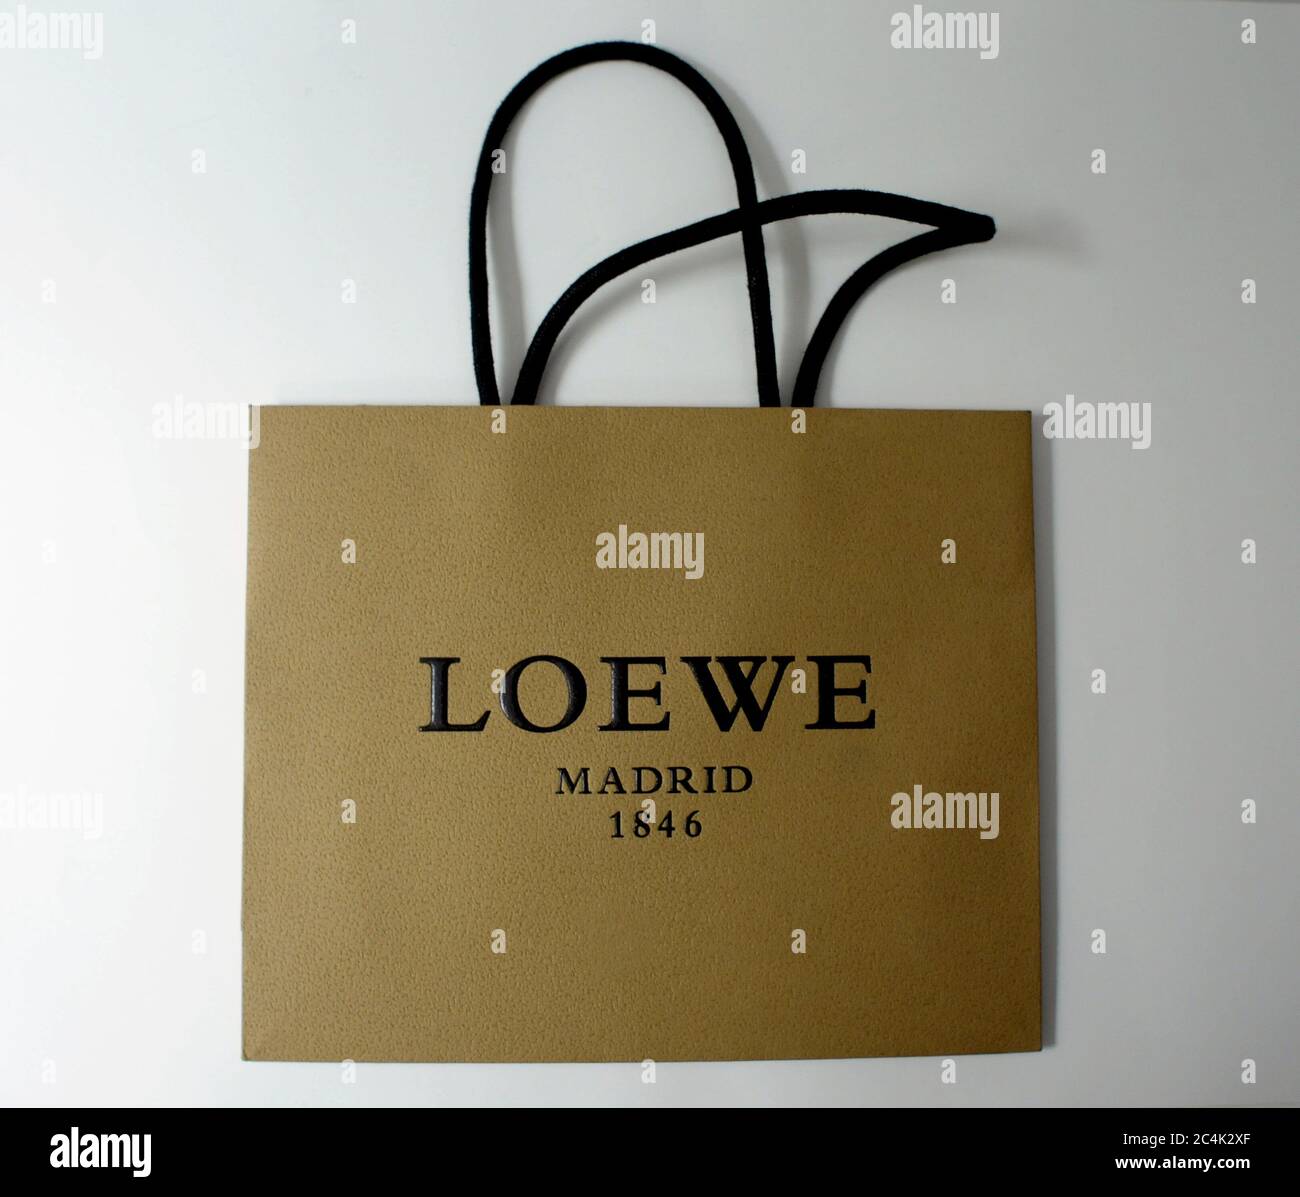 LOEWE paper bag. Design. Founded in 